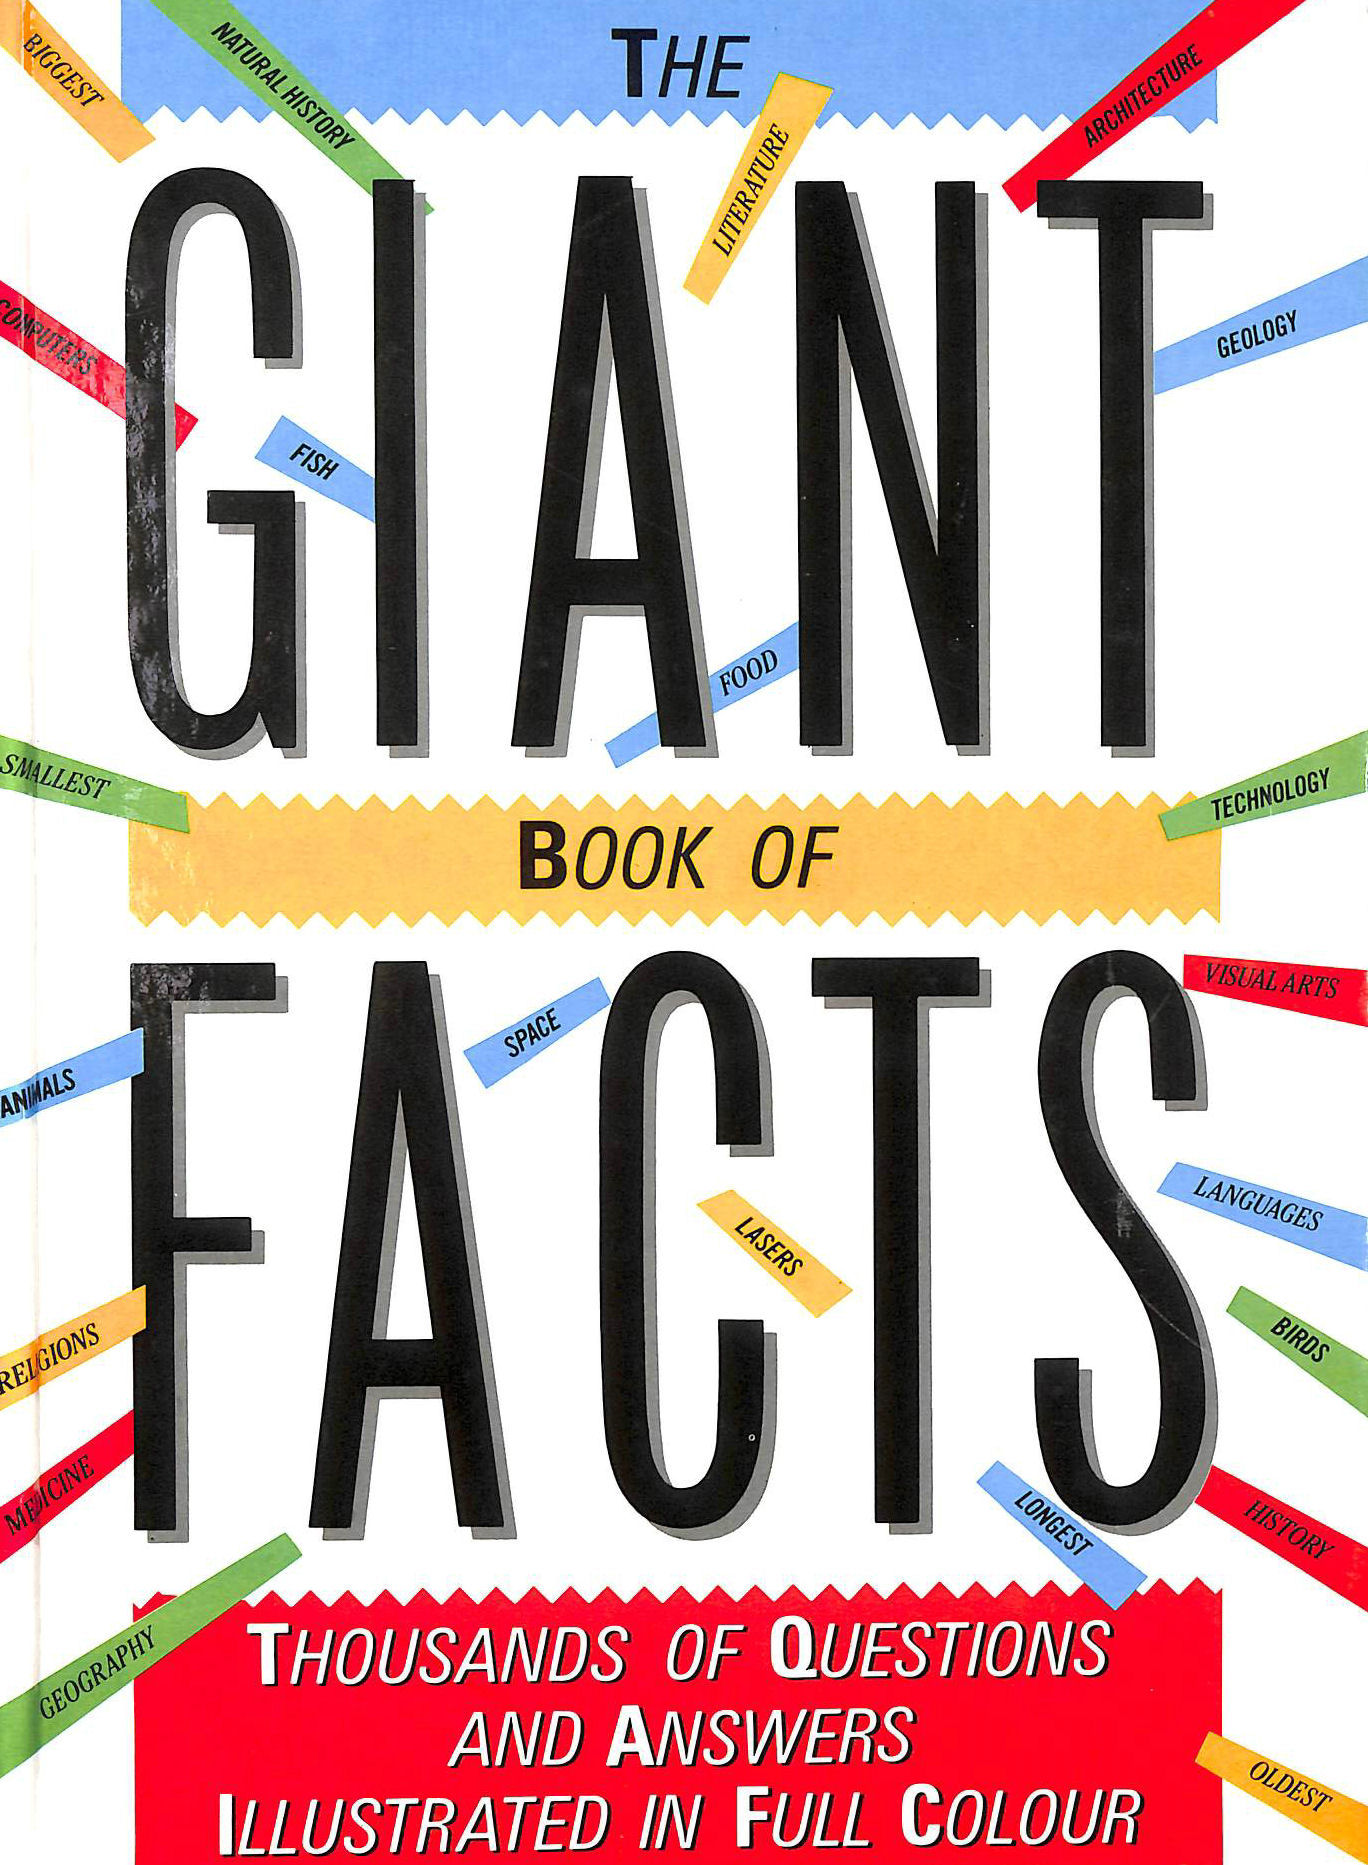 VARIOUS - Giant Book of Facts, The